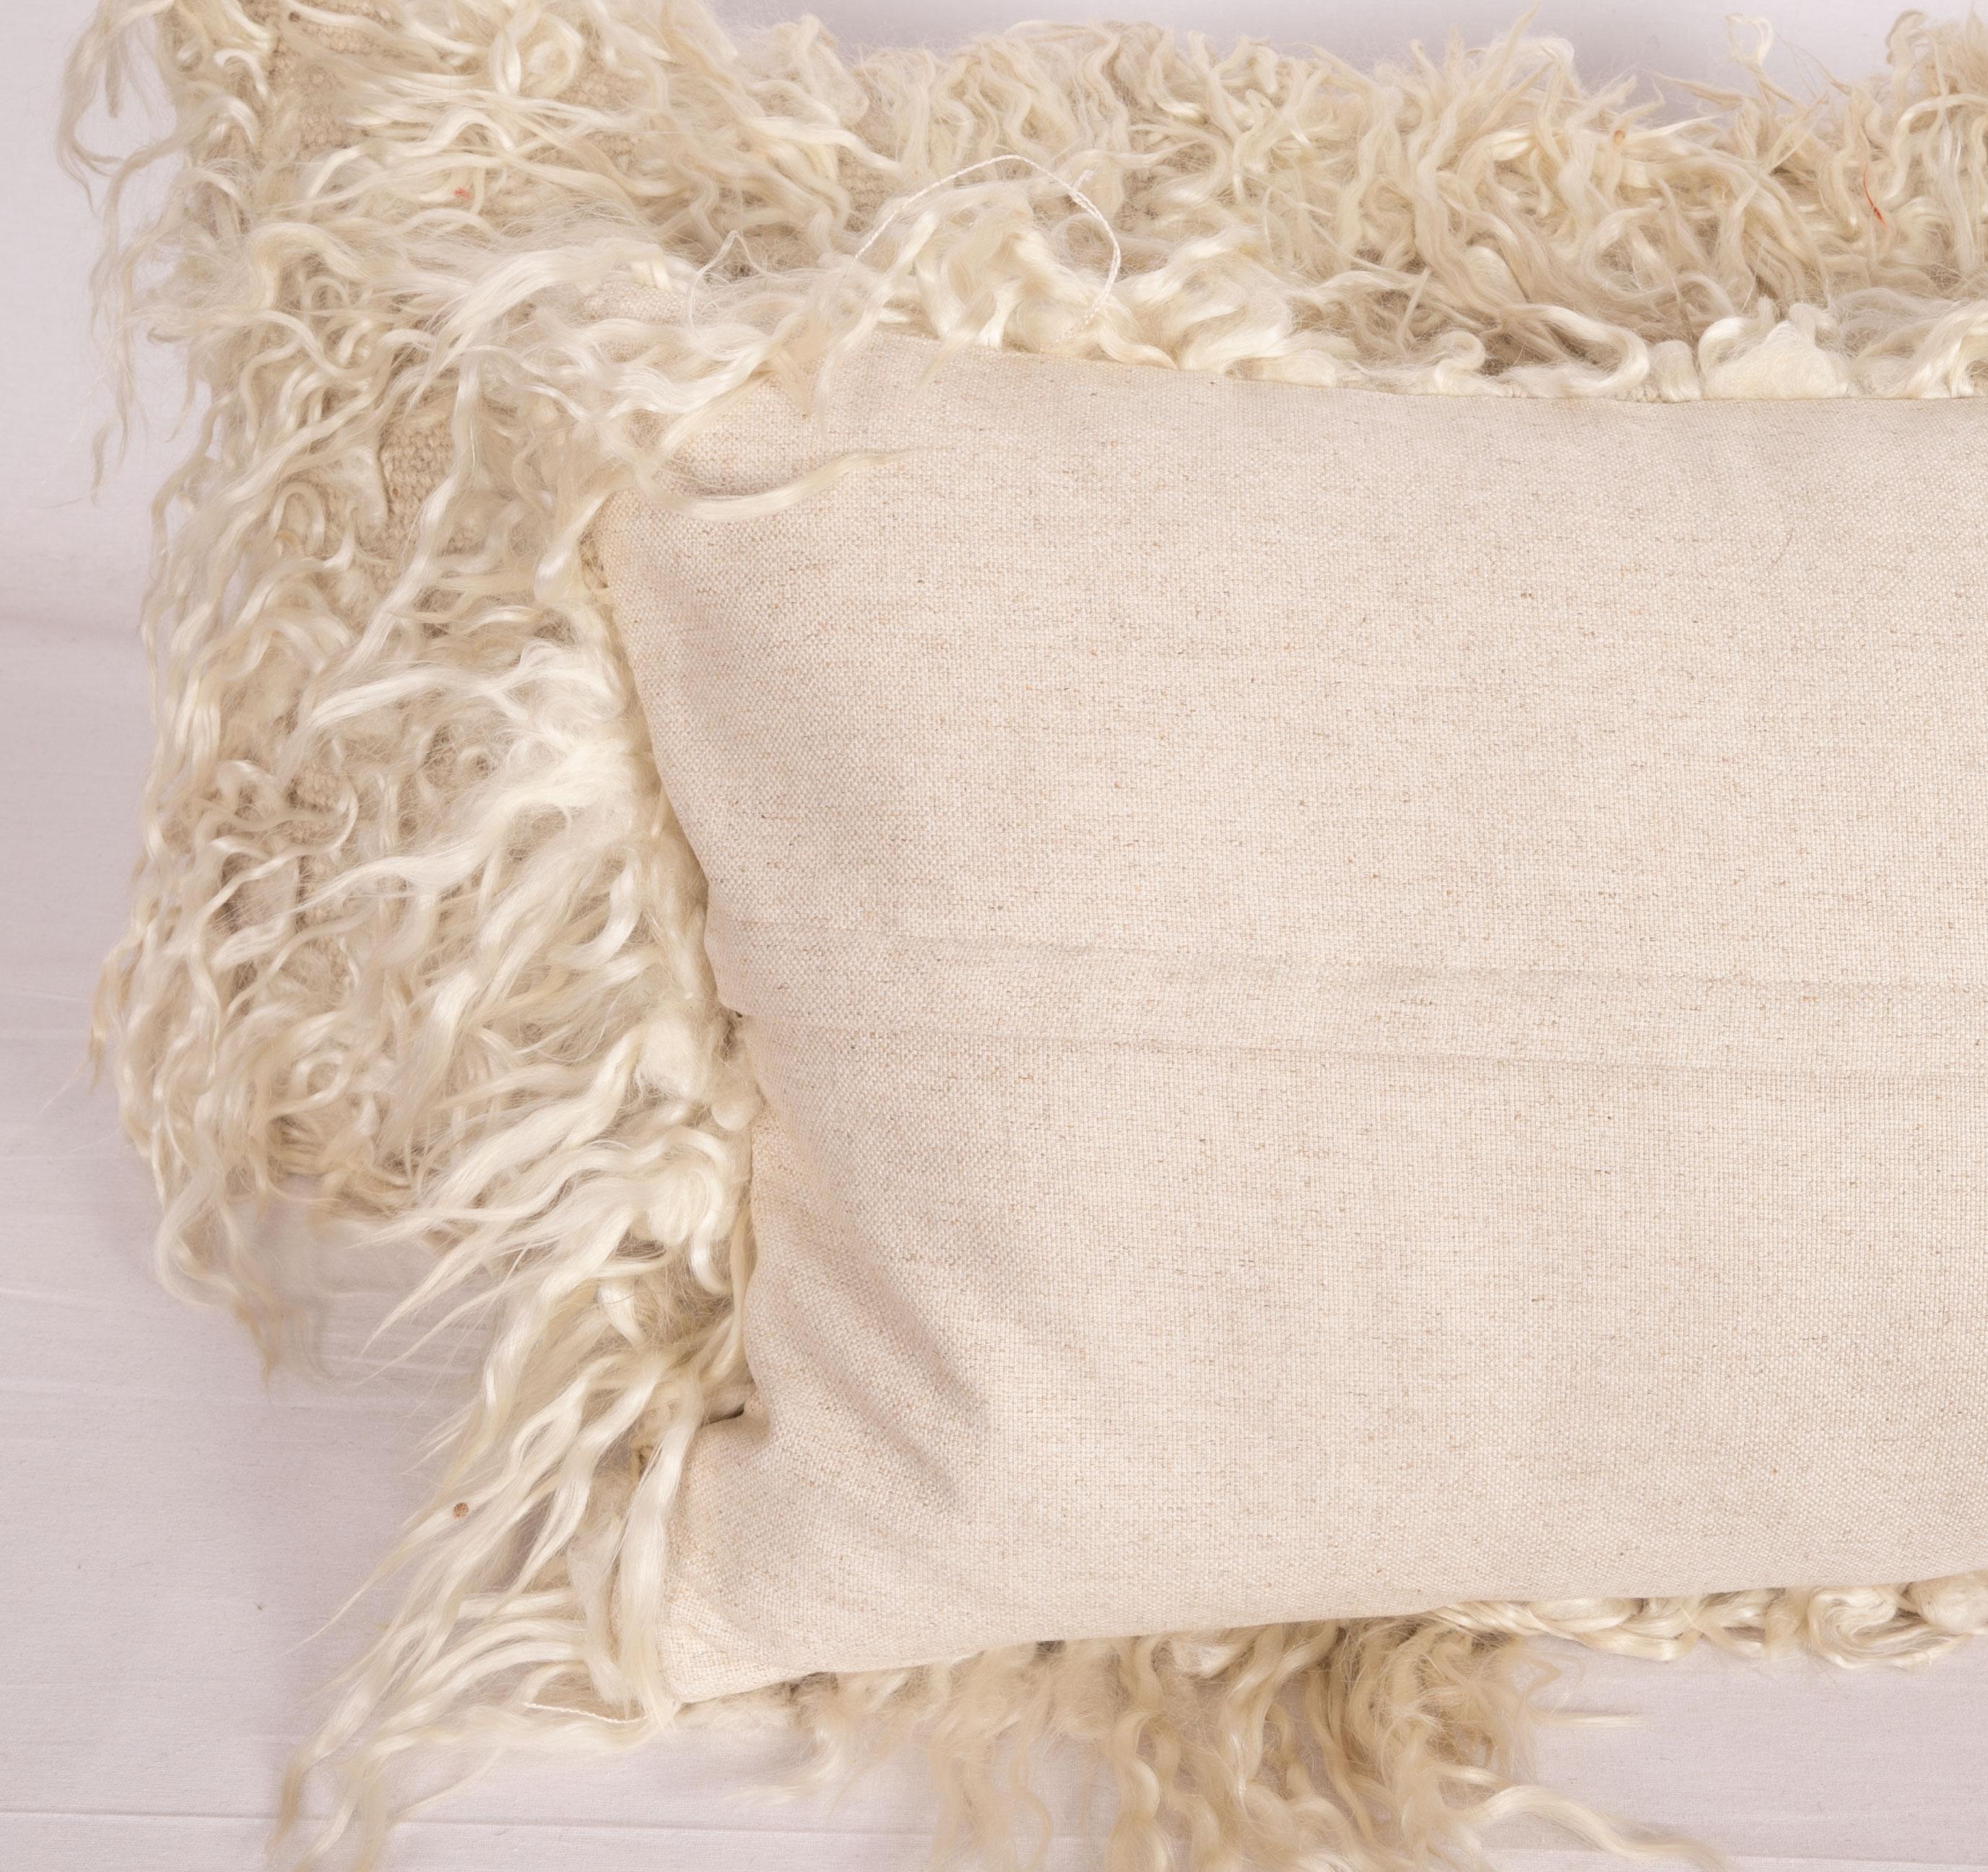 Hand-Woven Angora Pillow Cases Fashioned from a Mid-20th Century Angora Filikli Rug